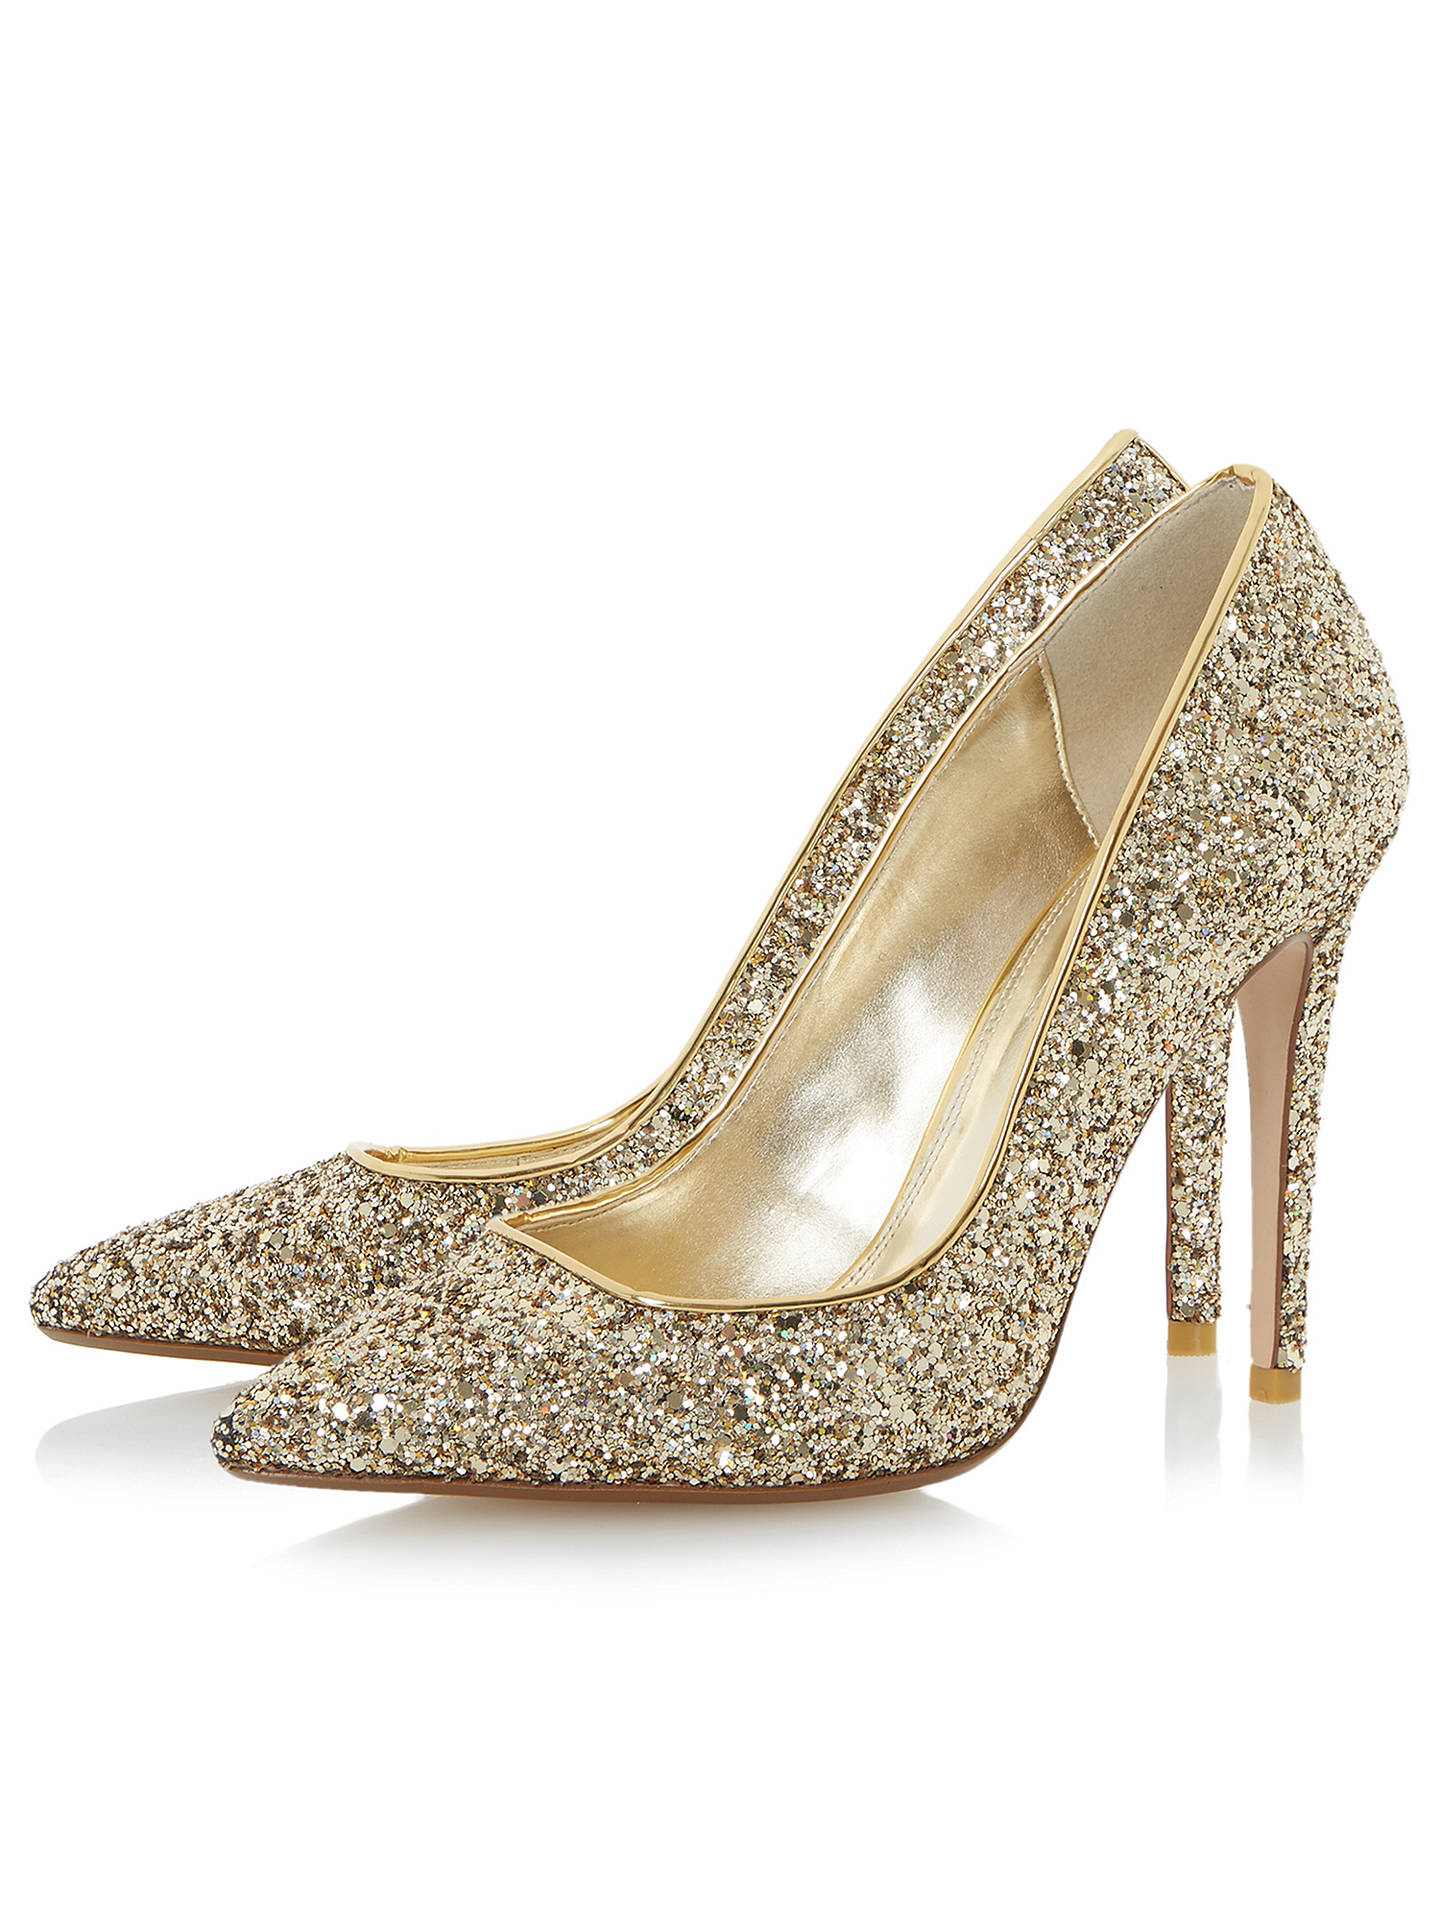 Dune Aiyana Pointed Toe Court Shoes, Gold Glitter at John Lewis & Partners